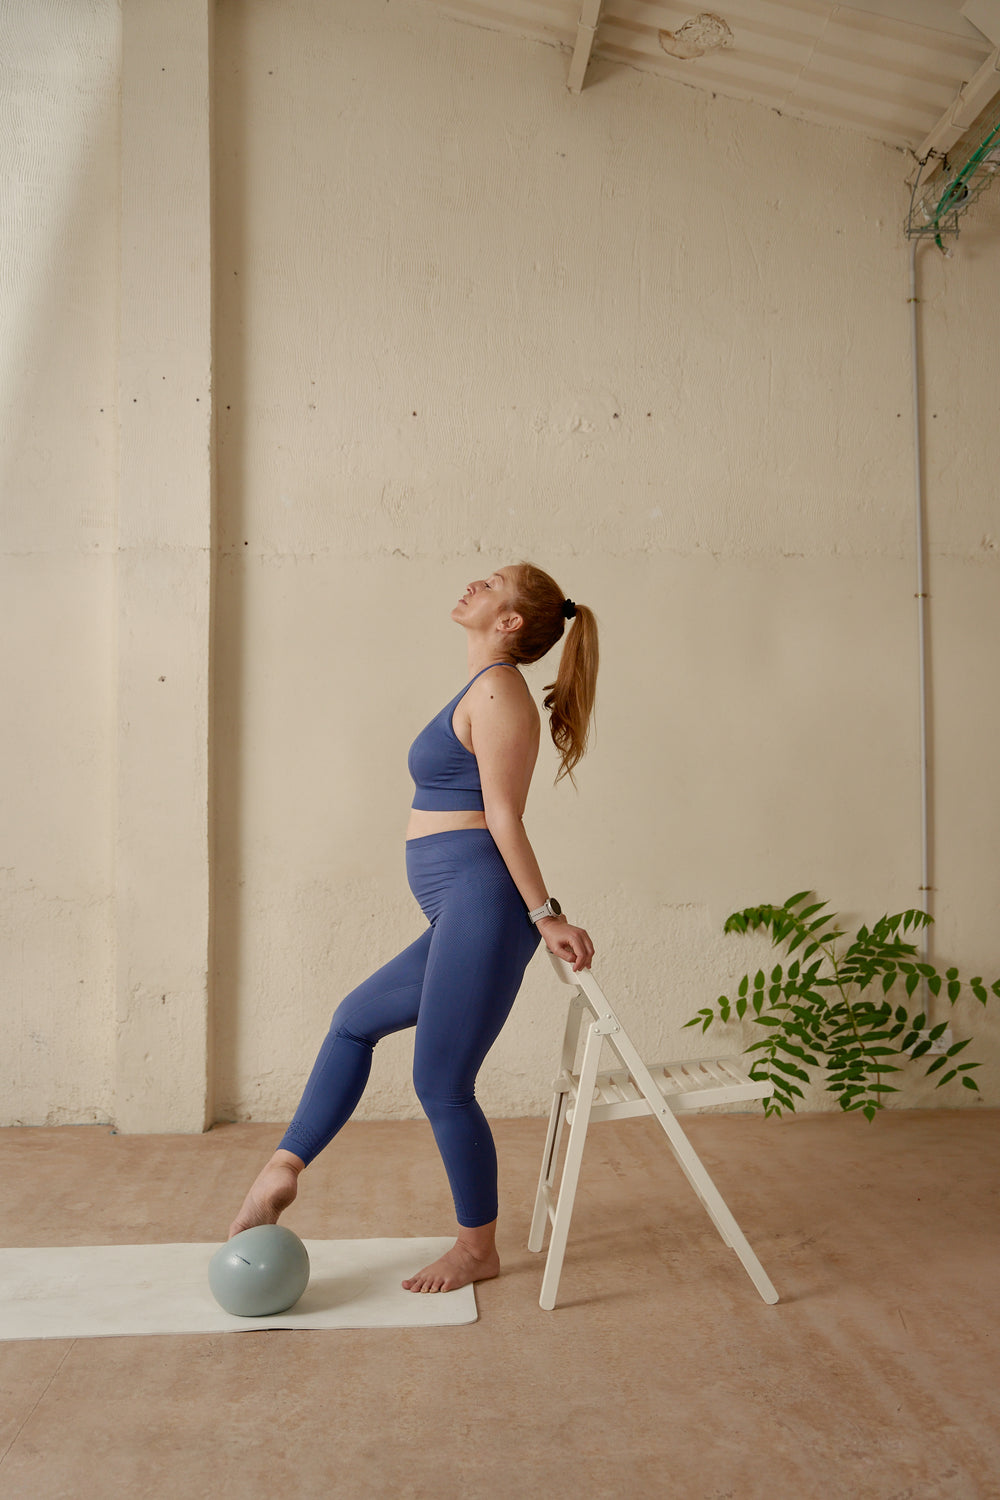 Barre session: Express barre class suitable for pregnant women Sept24